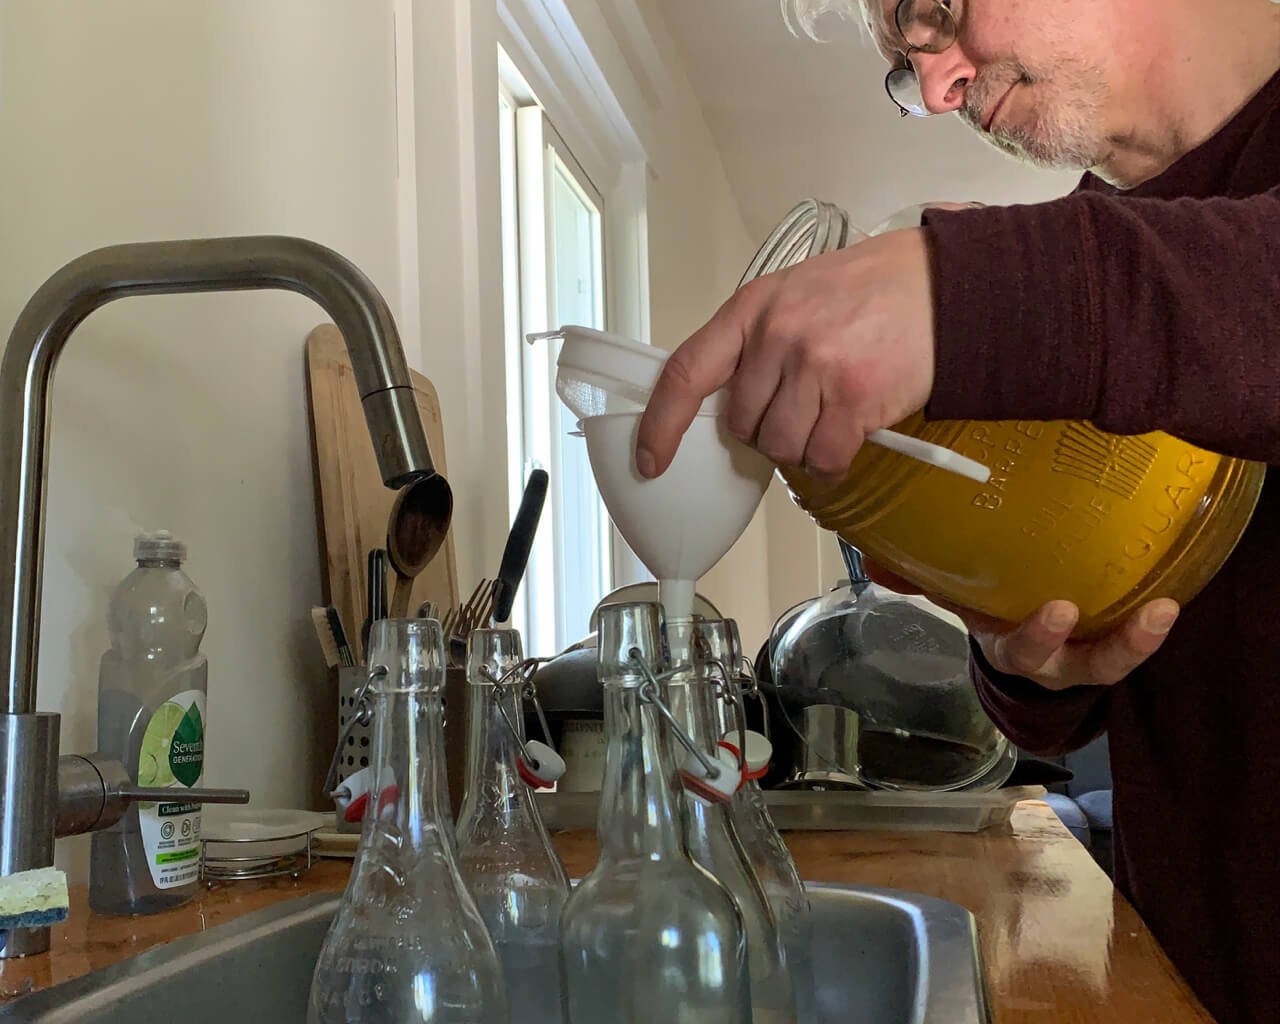 FitLifeMove |fitness and wellness for adults 55 and over | Michel Duran filling up bottle of kombucha.jpg